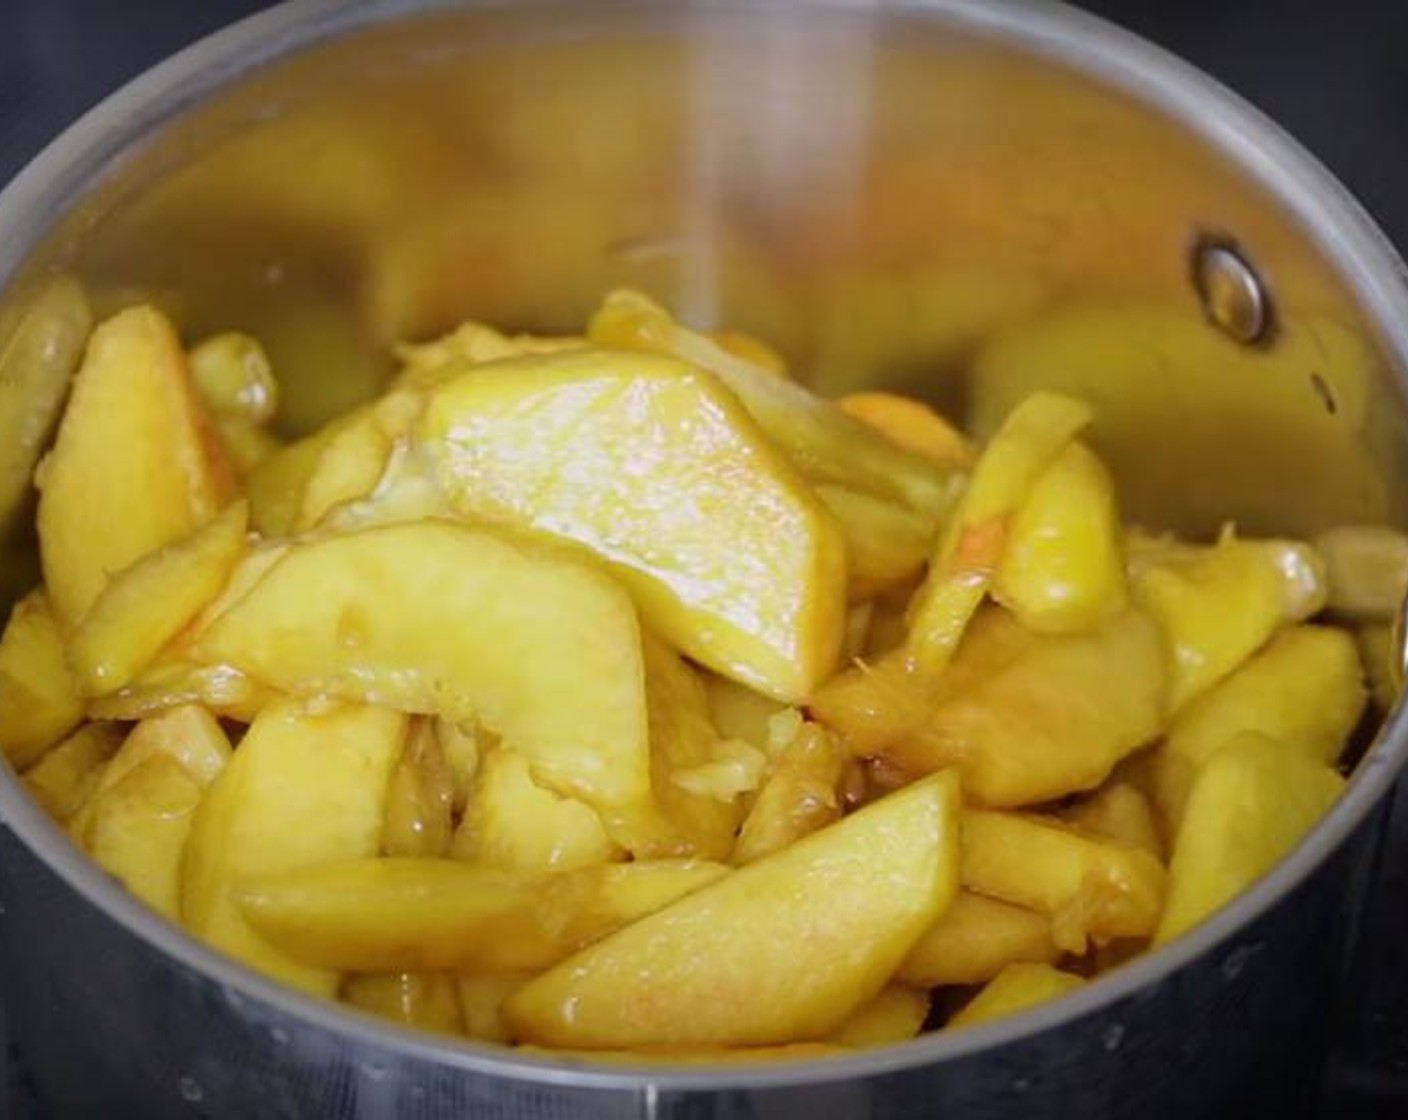 step 2 In a saucepan over medium heat, add Peaches (12 cups), Caster Sugar (1/2 cup), Ground Cinnamon (1/2 tsp), and juice from Lemon (1), stir to combine and bring to a boil. Cook for few minutes until the peaches soften a little bit. Set aside.